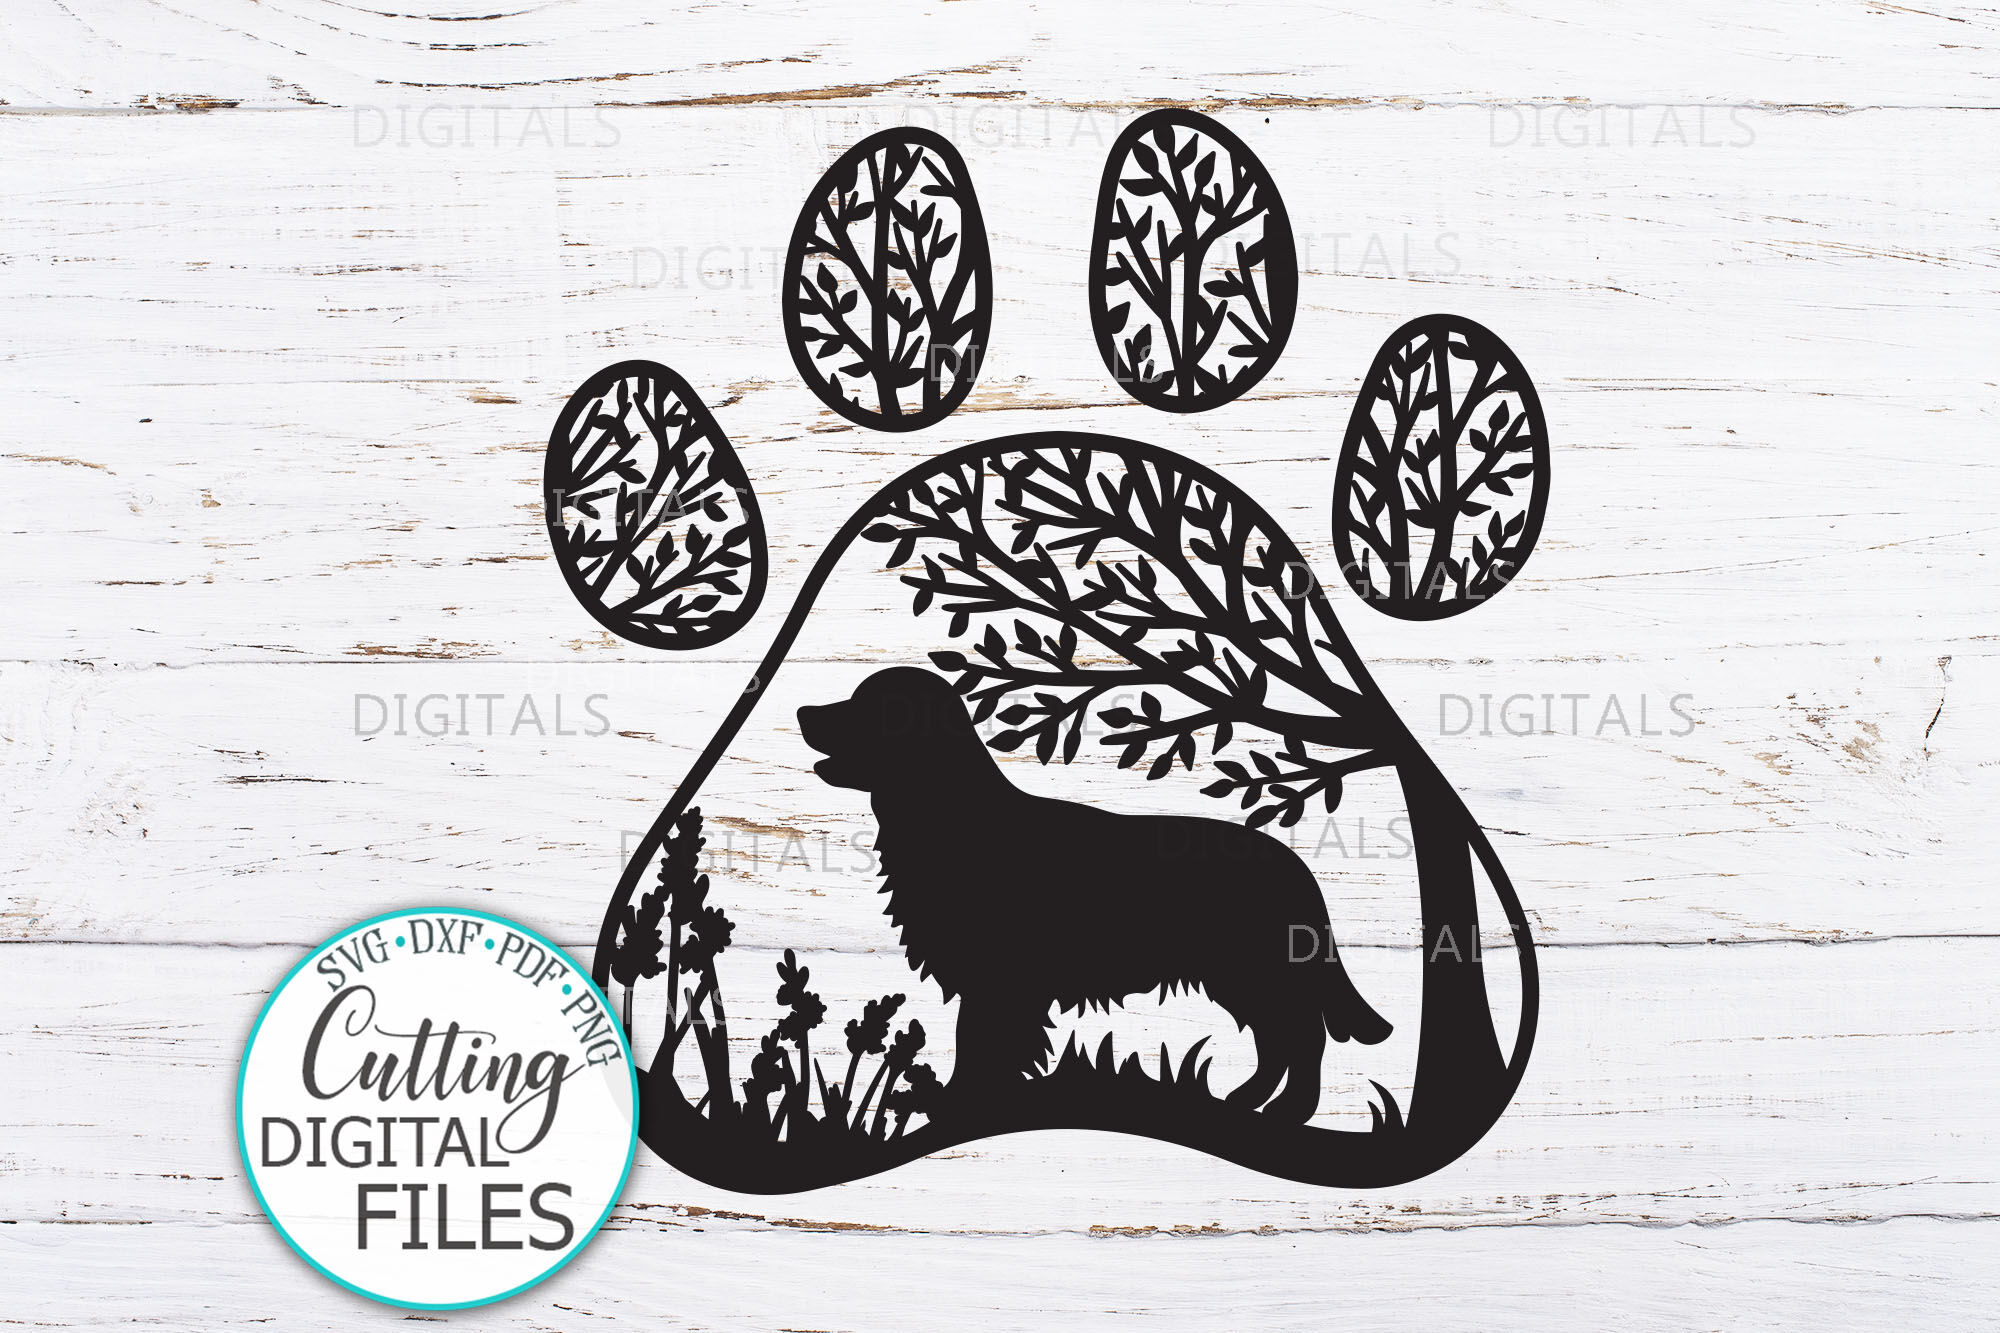 Download Golden Retriever Paw Dog Round Sign Svg Dxf Pdf Cut Out File By Kartcreation Thehungryjpeg Com